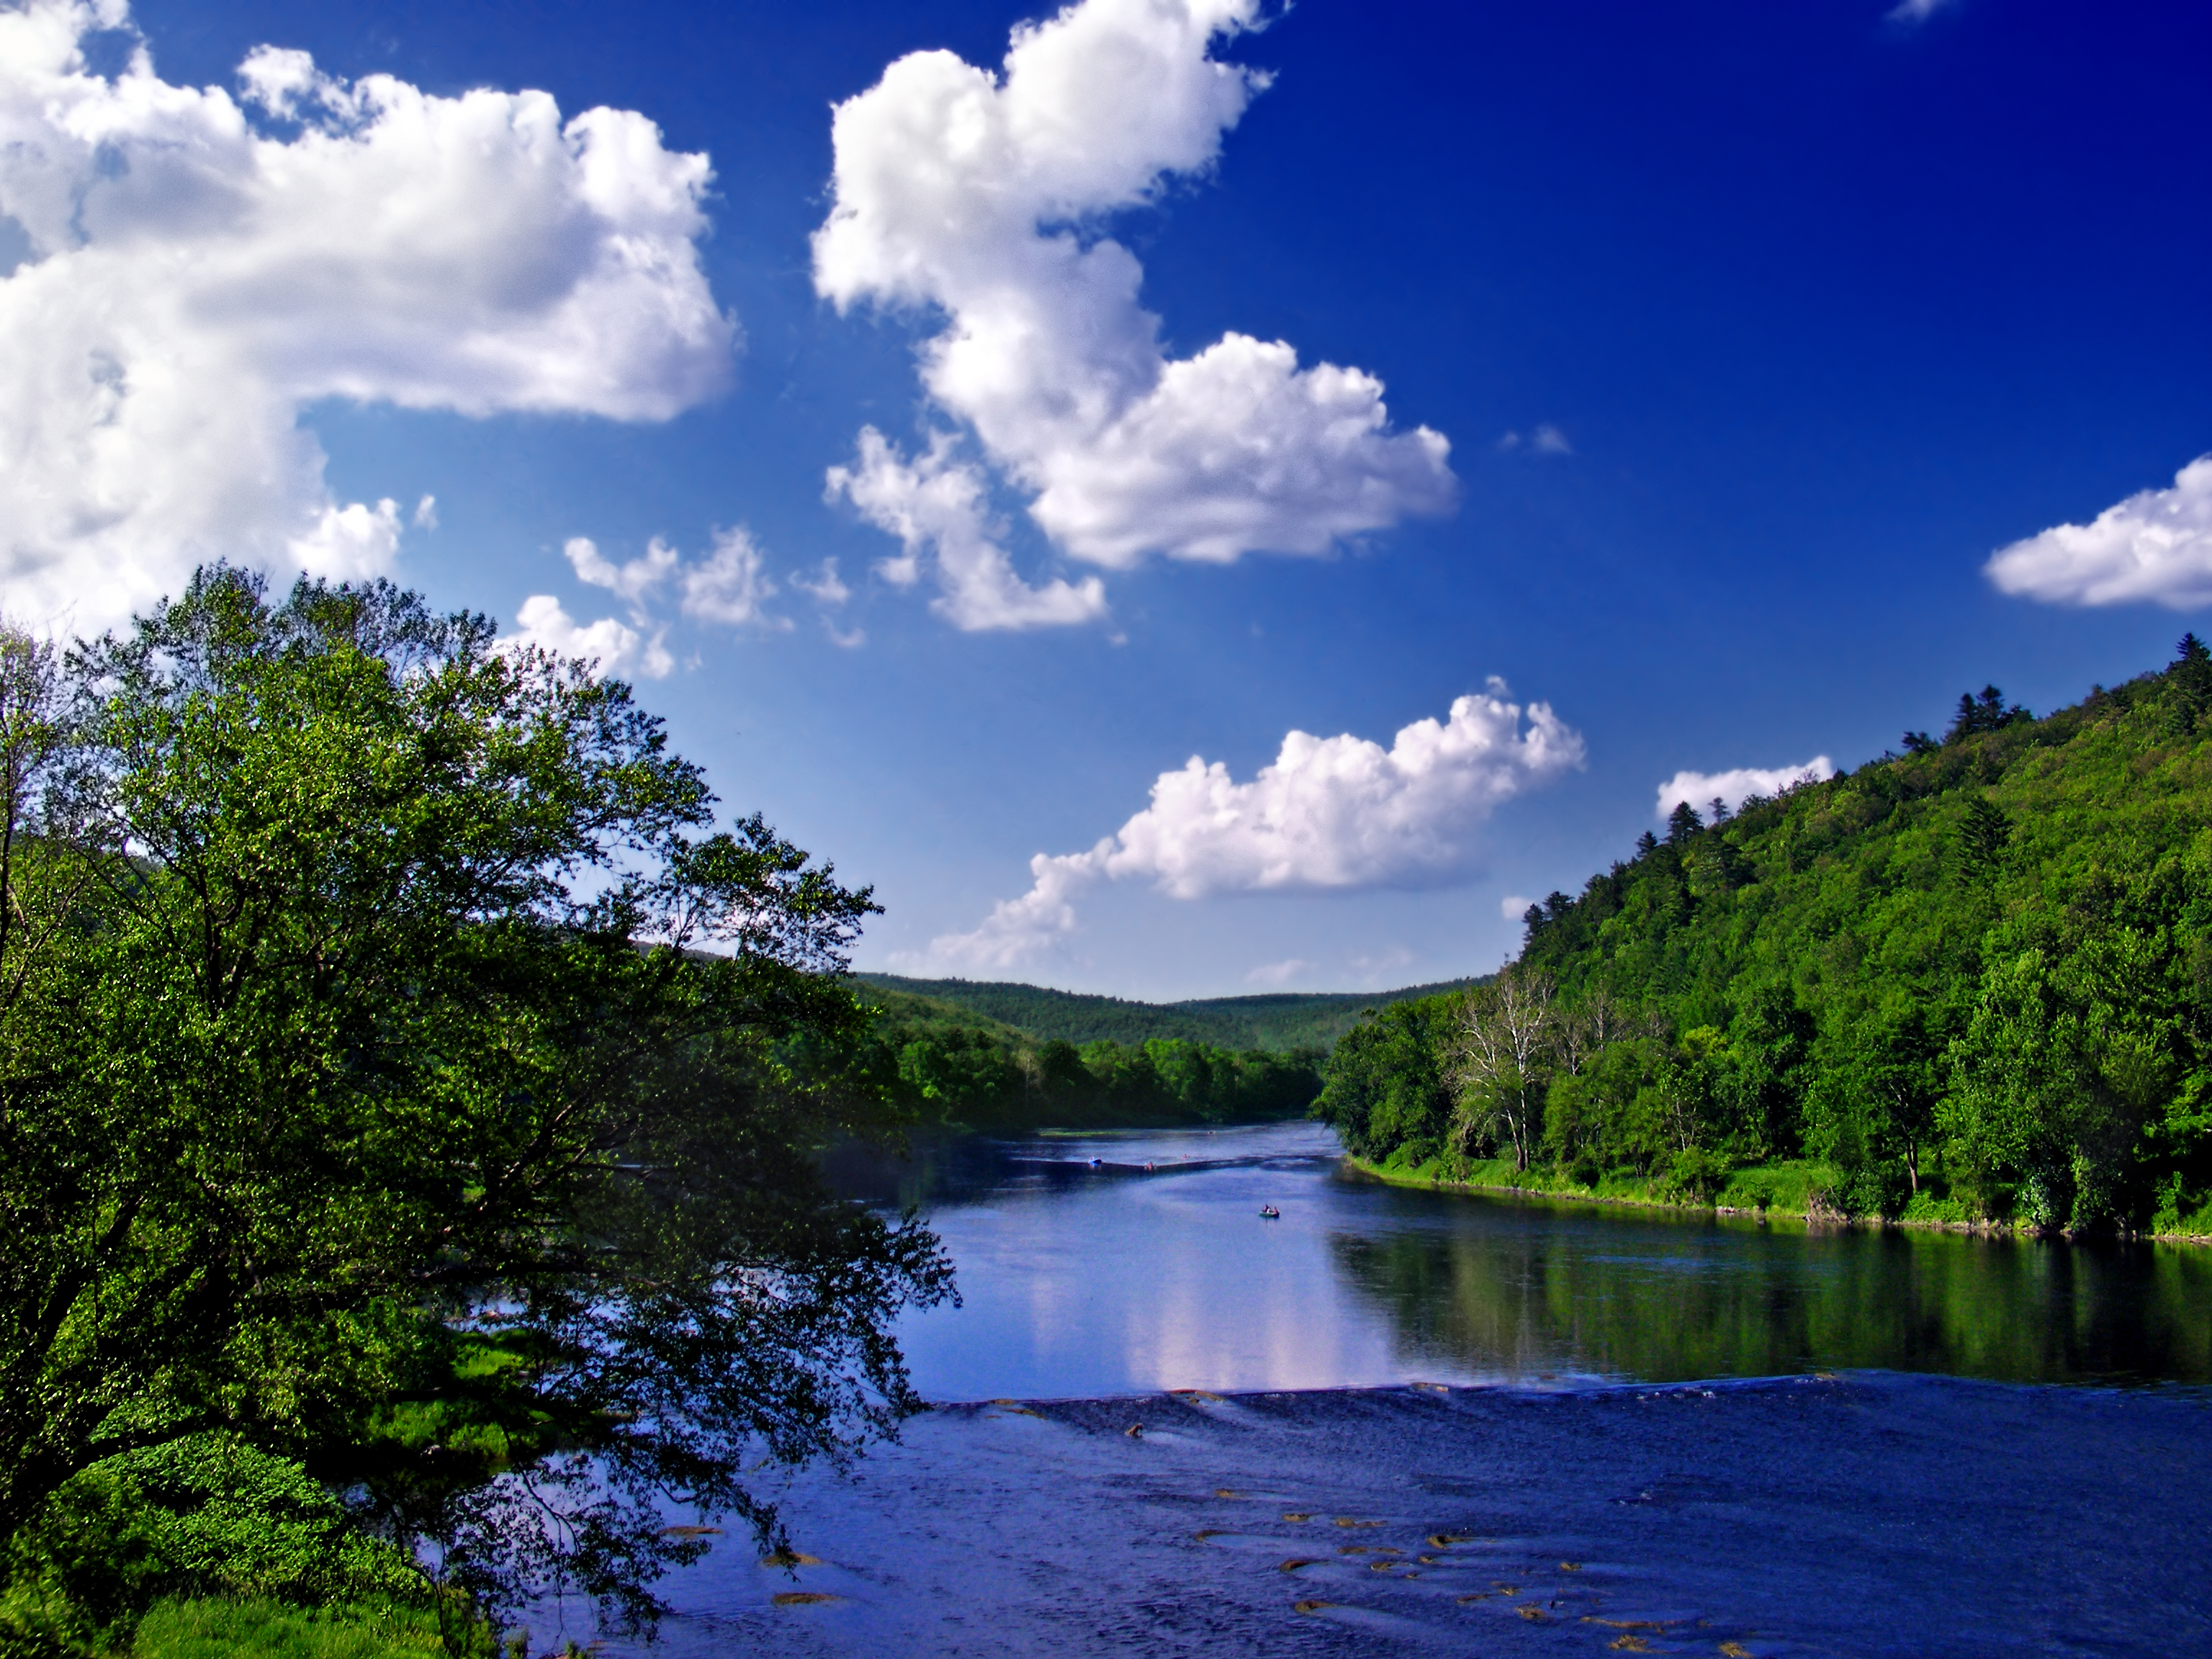 A large river flows through a forest reflecting a bright blue sky with large white clouds.